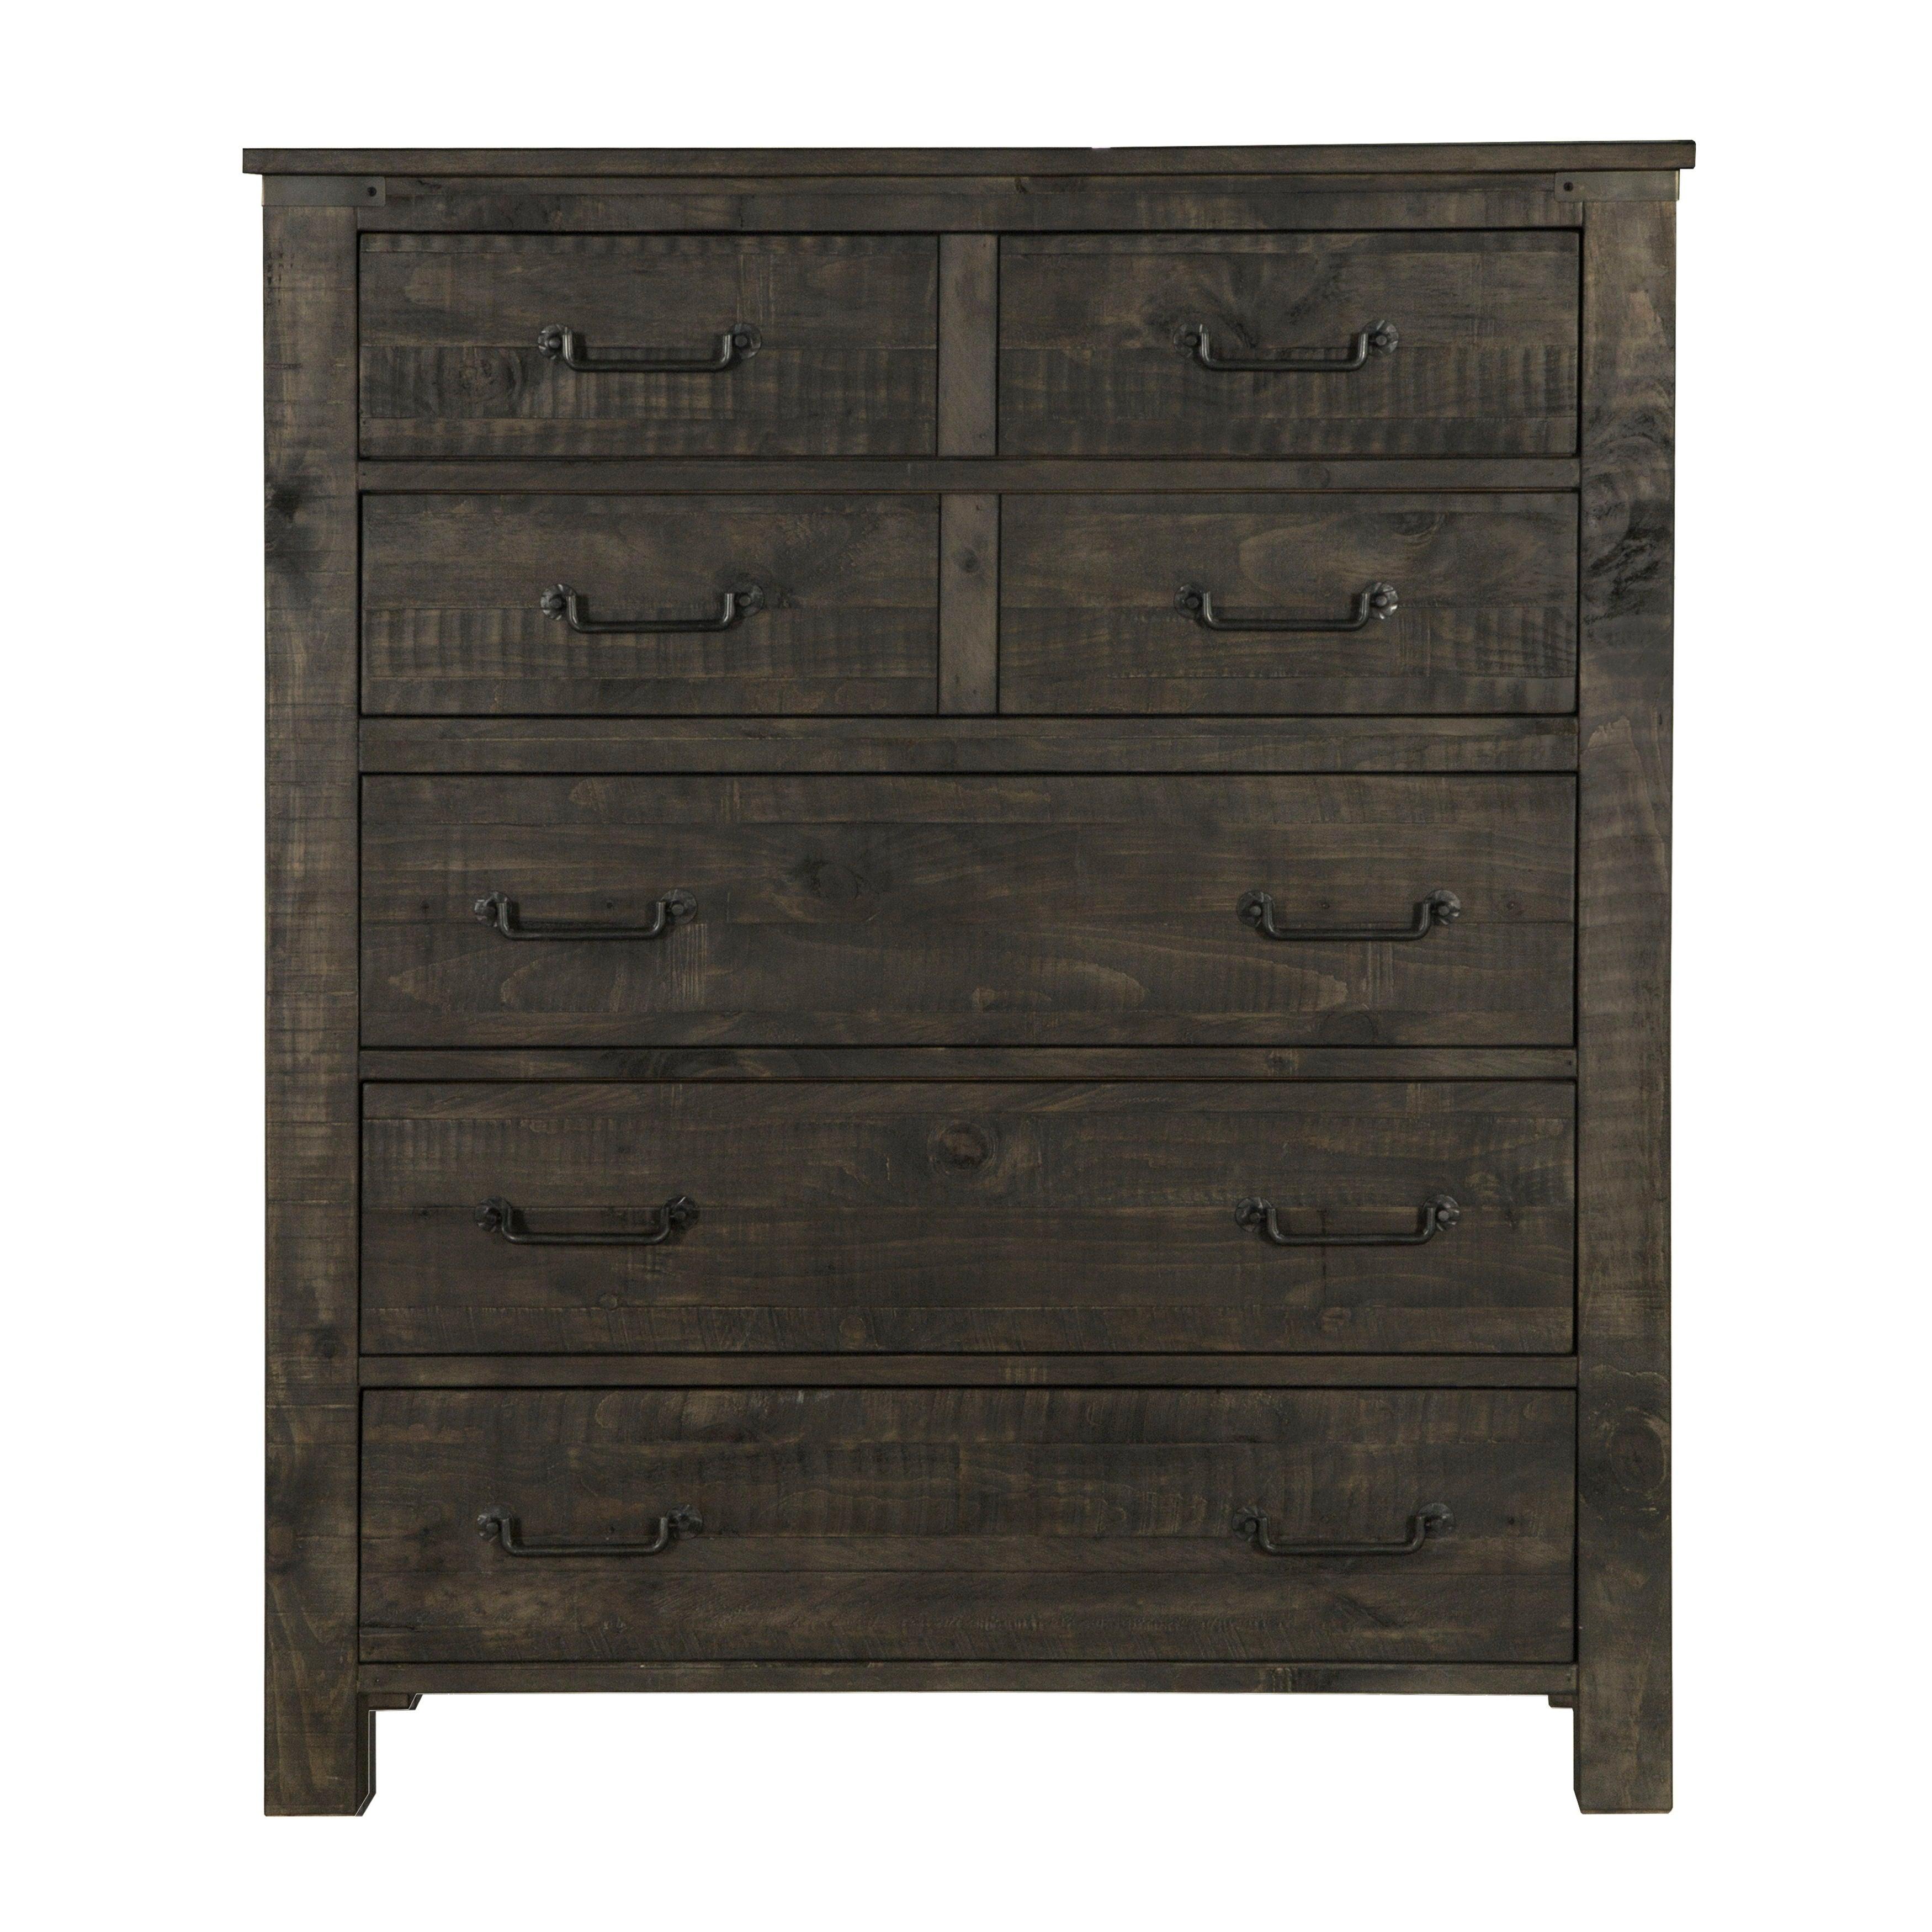 Magnussen Furniture - Abington - 5 Drawer Chest - Weathered Charcoal - 5th Avenue Furniture